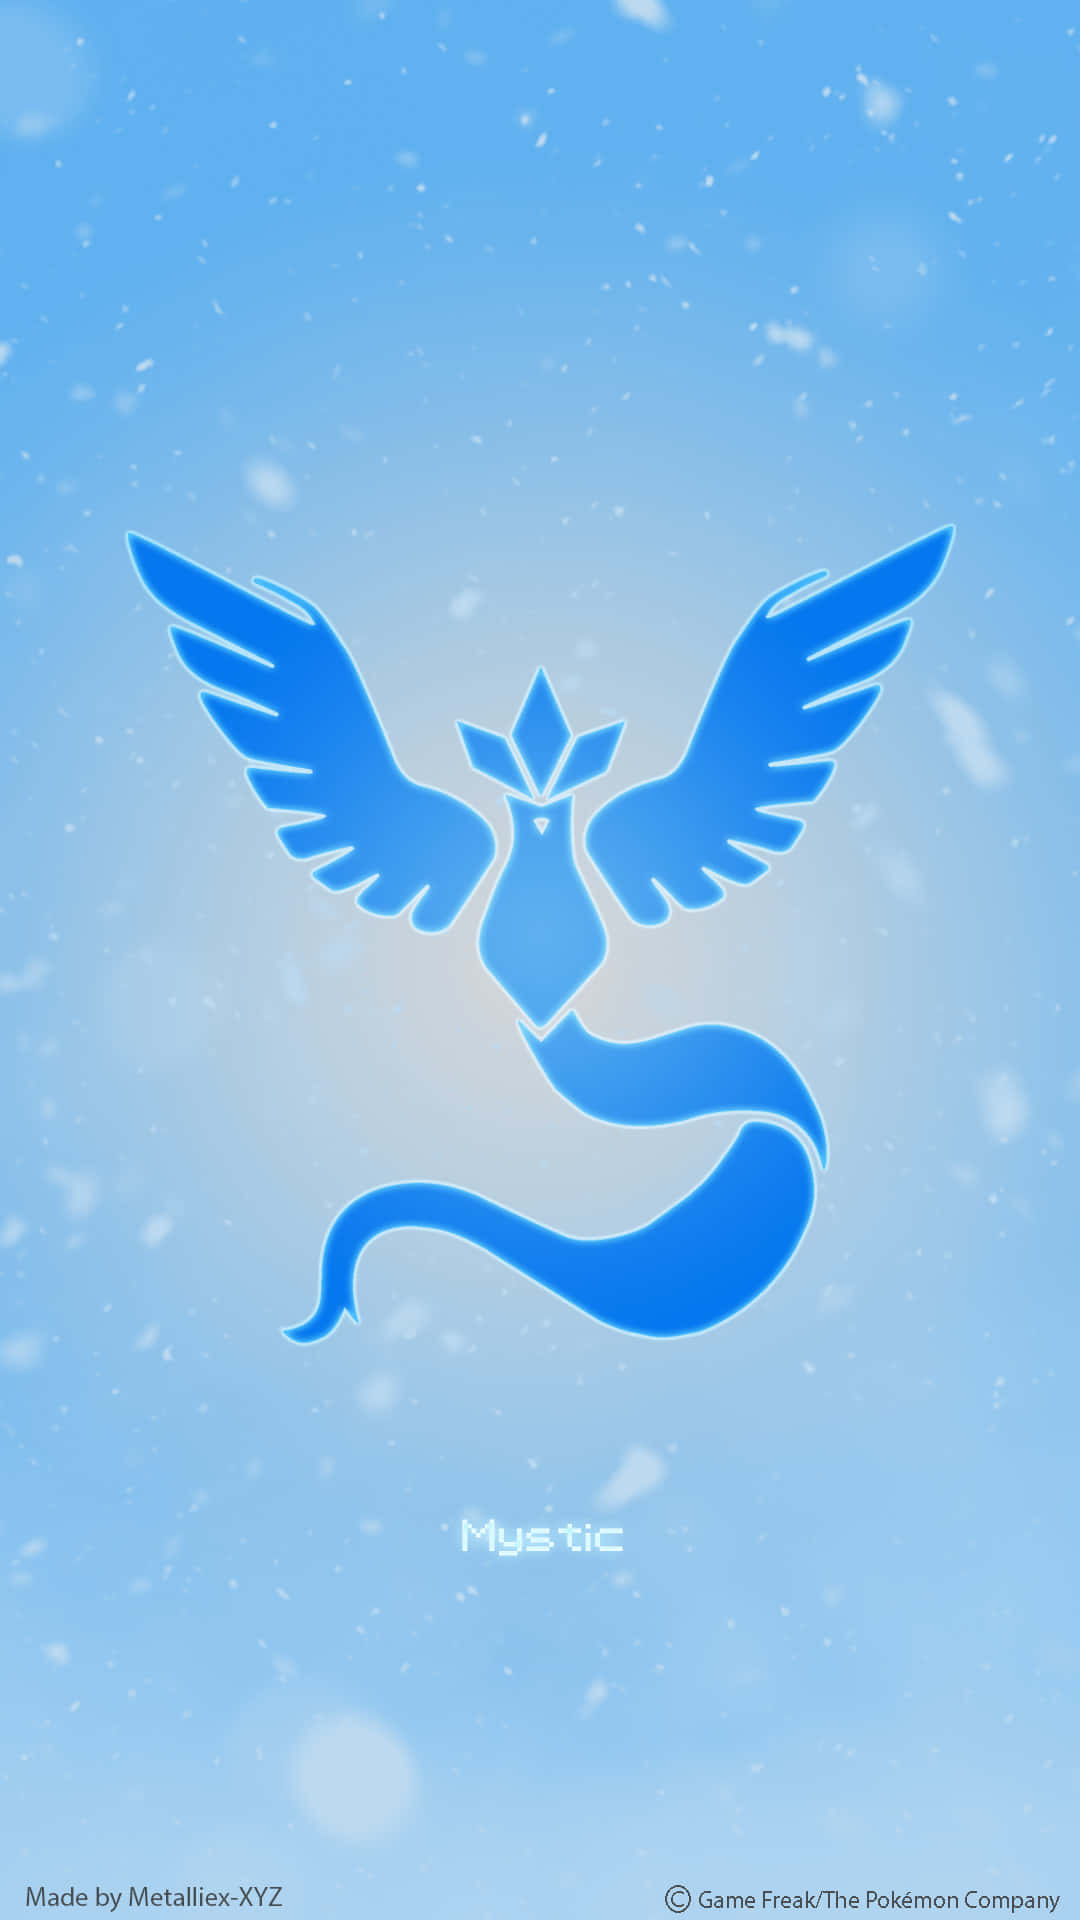 Join Team Mystic, Join The Quest!